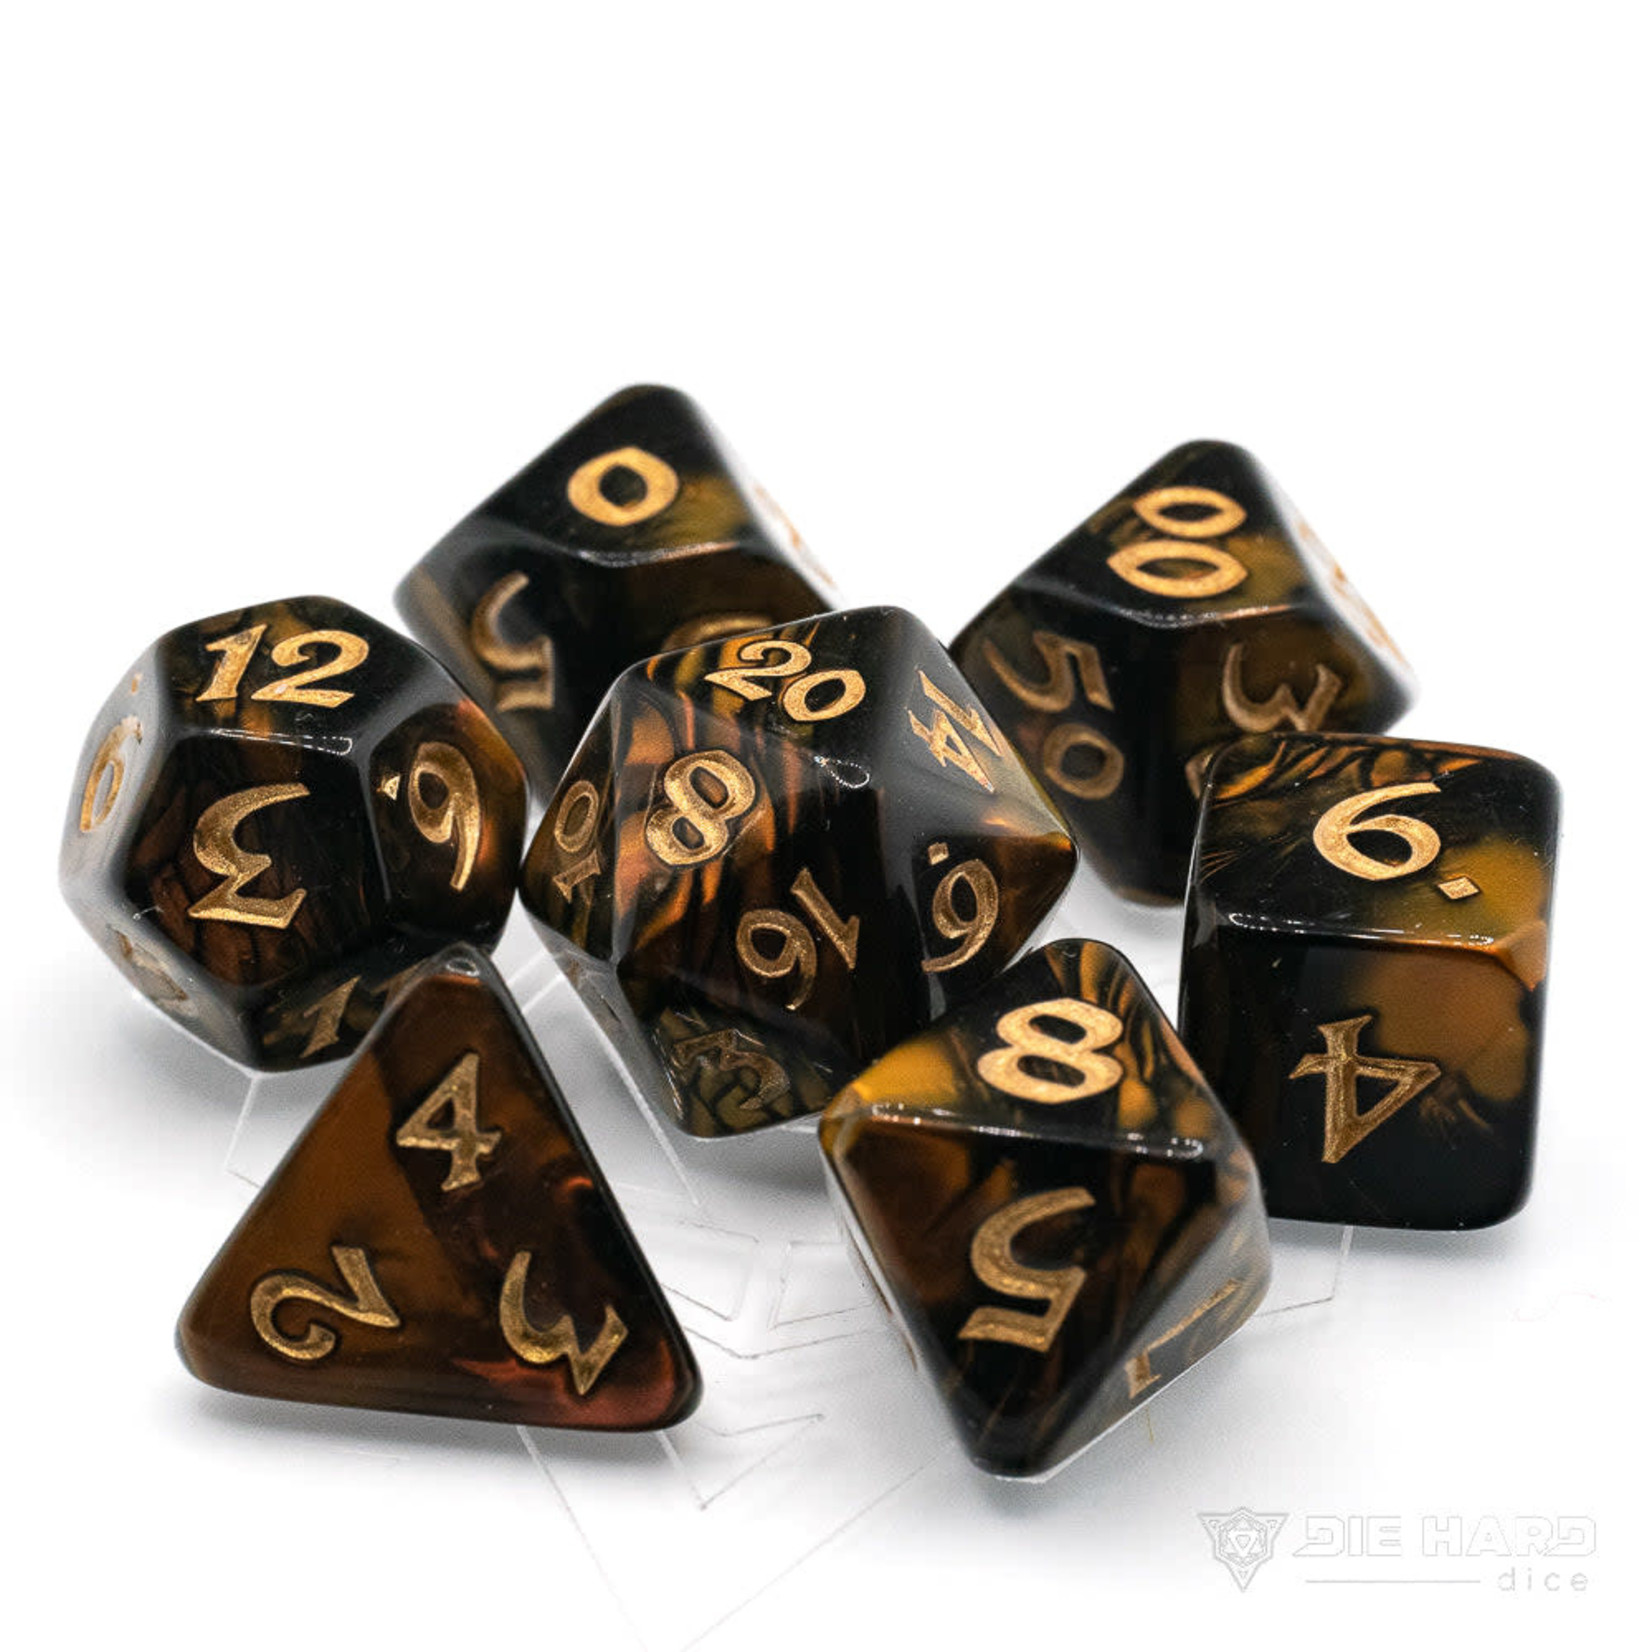 Die Hard Dice 7 Piece RPG Set - Elessia Changeling with Gold